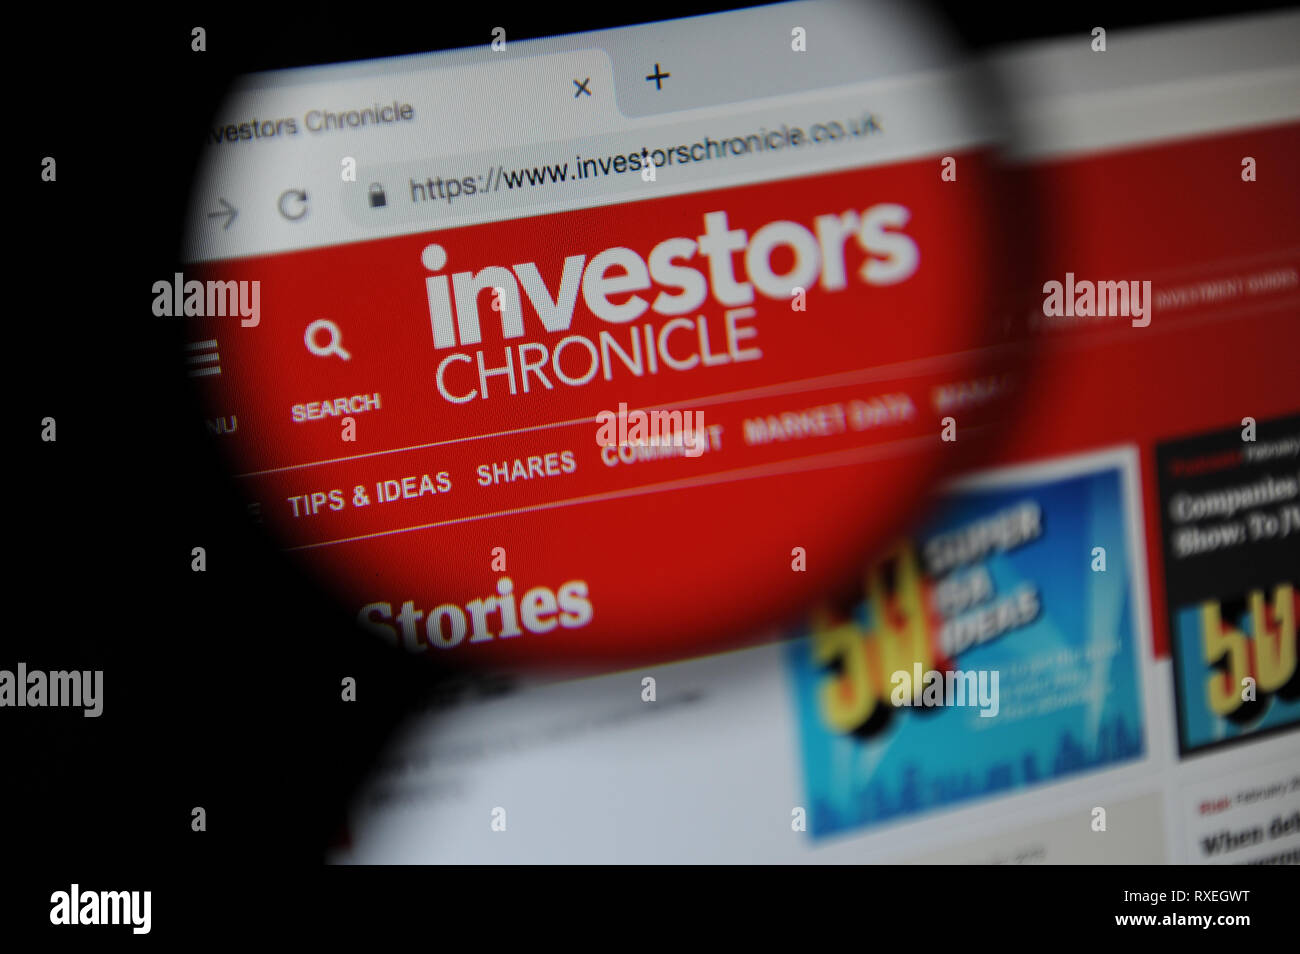 The Investors Chronicle website seen through a magnifying glass Stock Photo